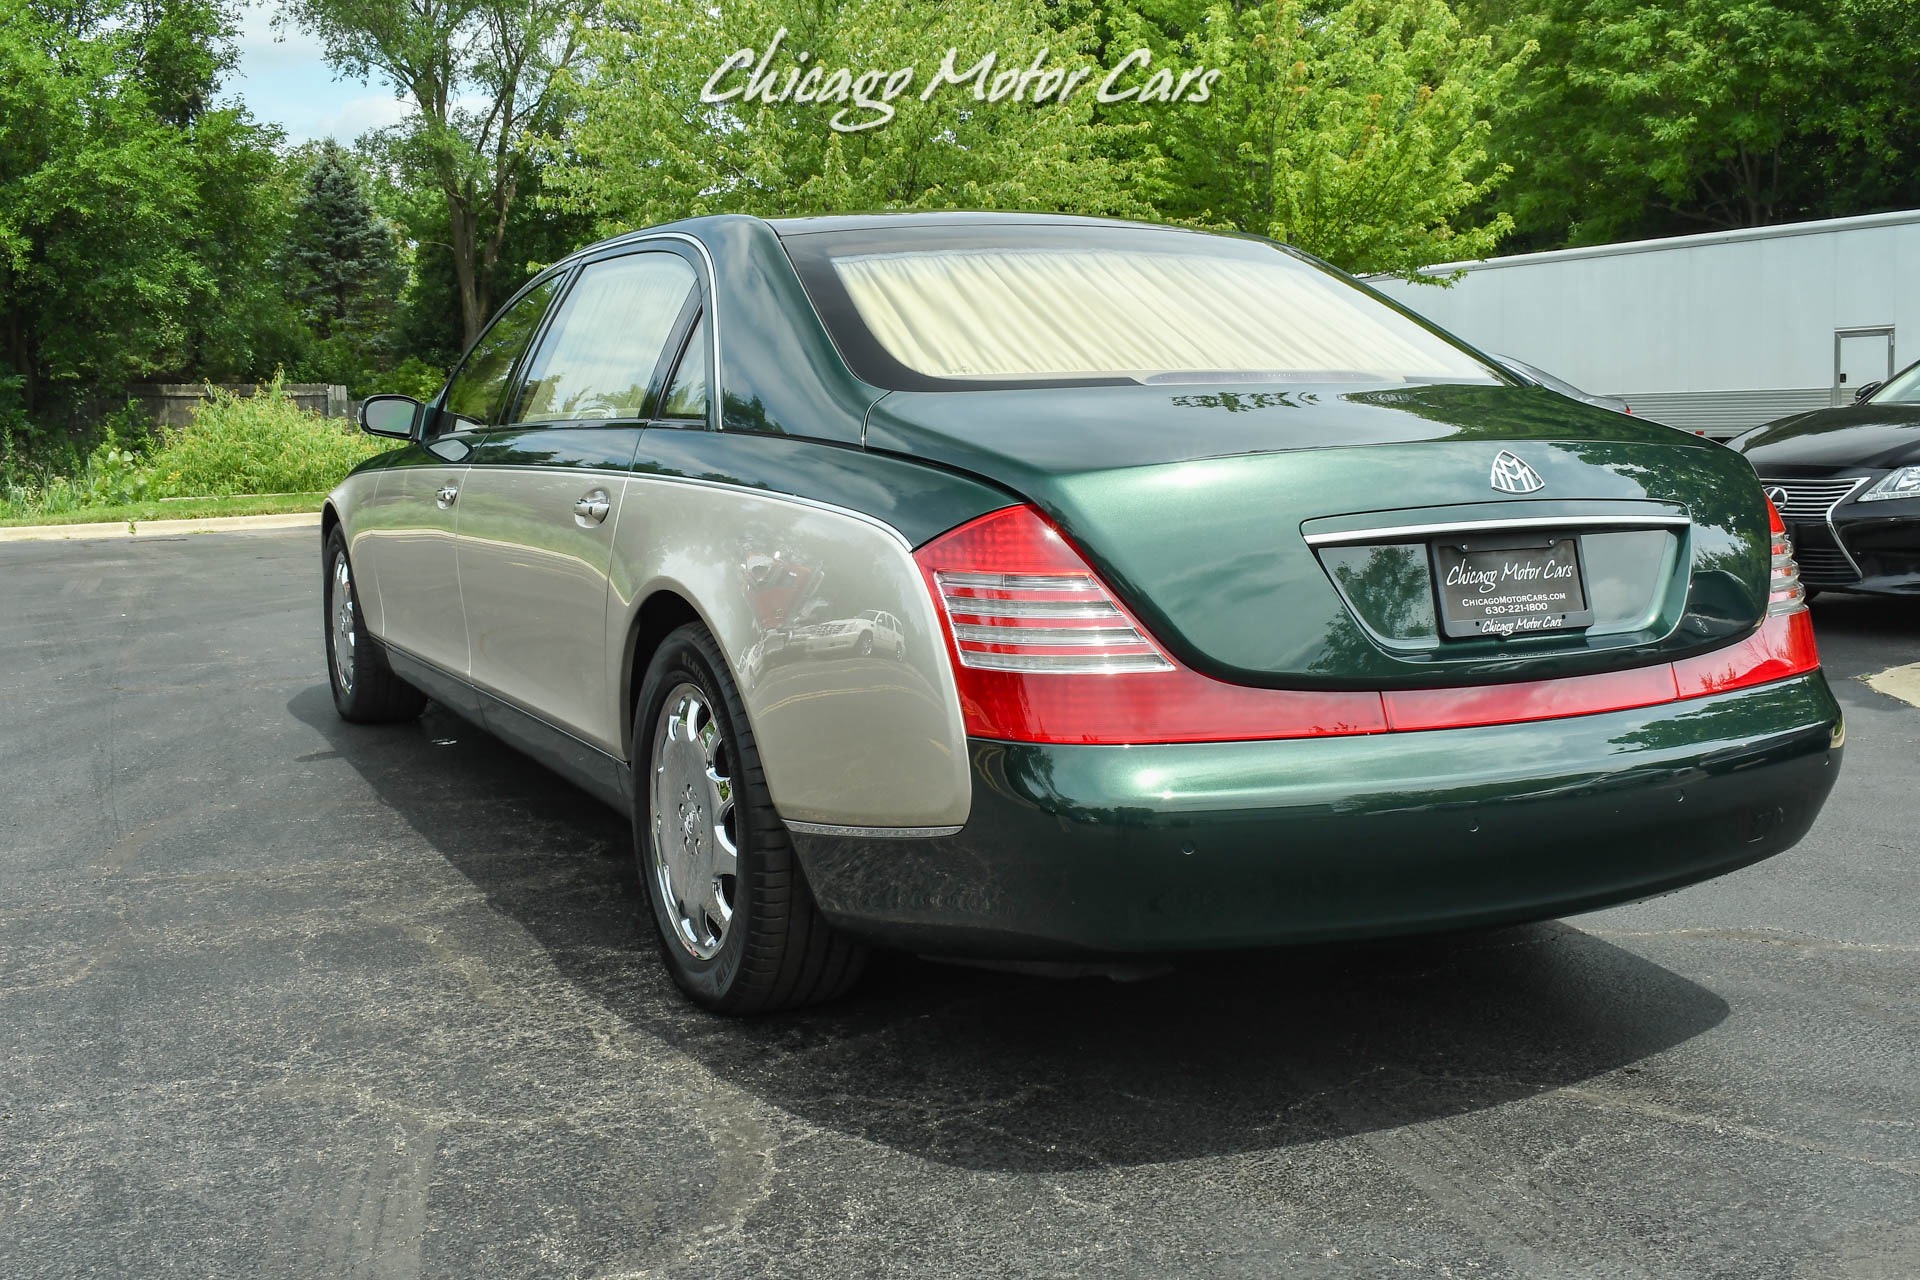 Used-2004-Maybach-62-PANO-ROOF-DUO-TONE-REAR-WINDOW-CURTAINS-LOW-MILES-PRISTINE